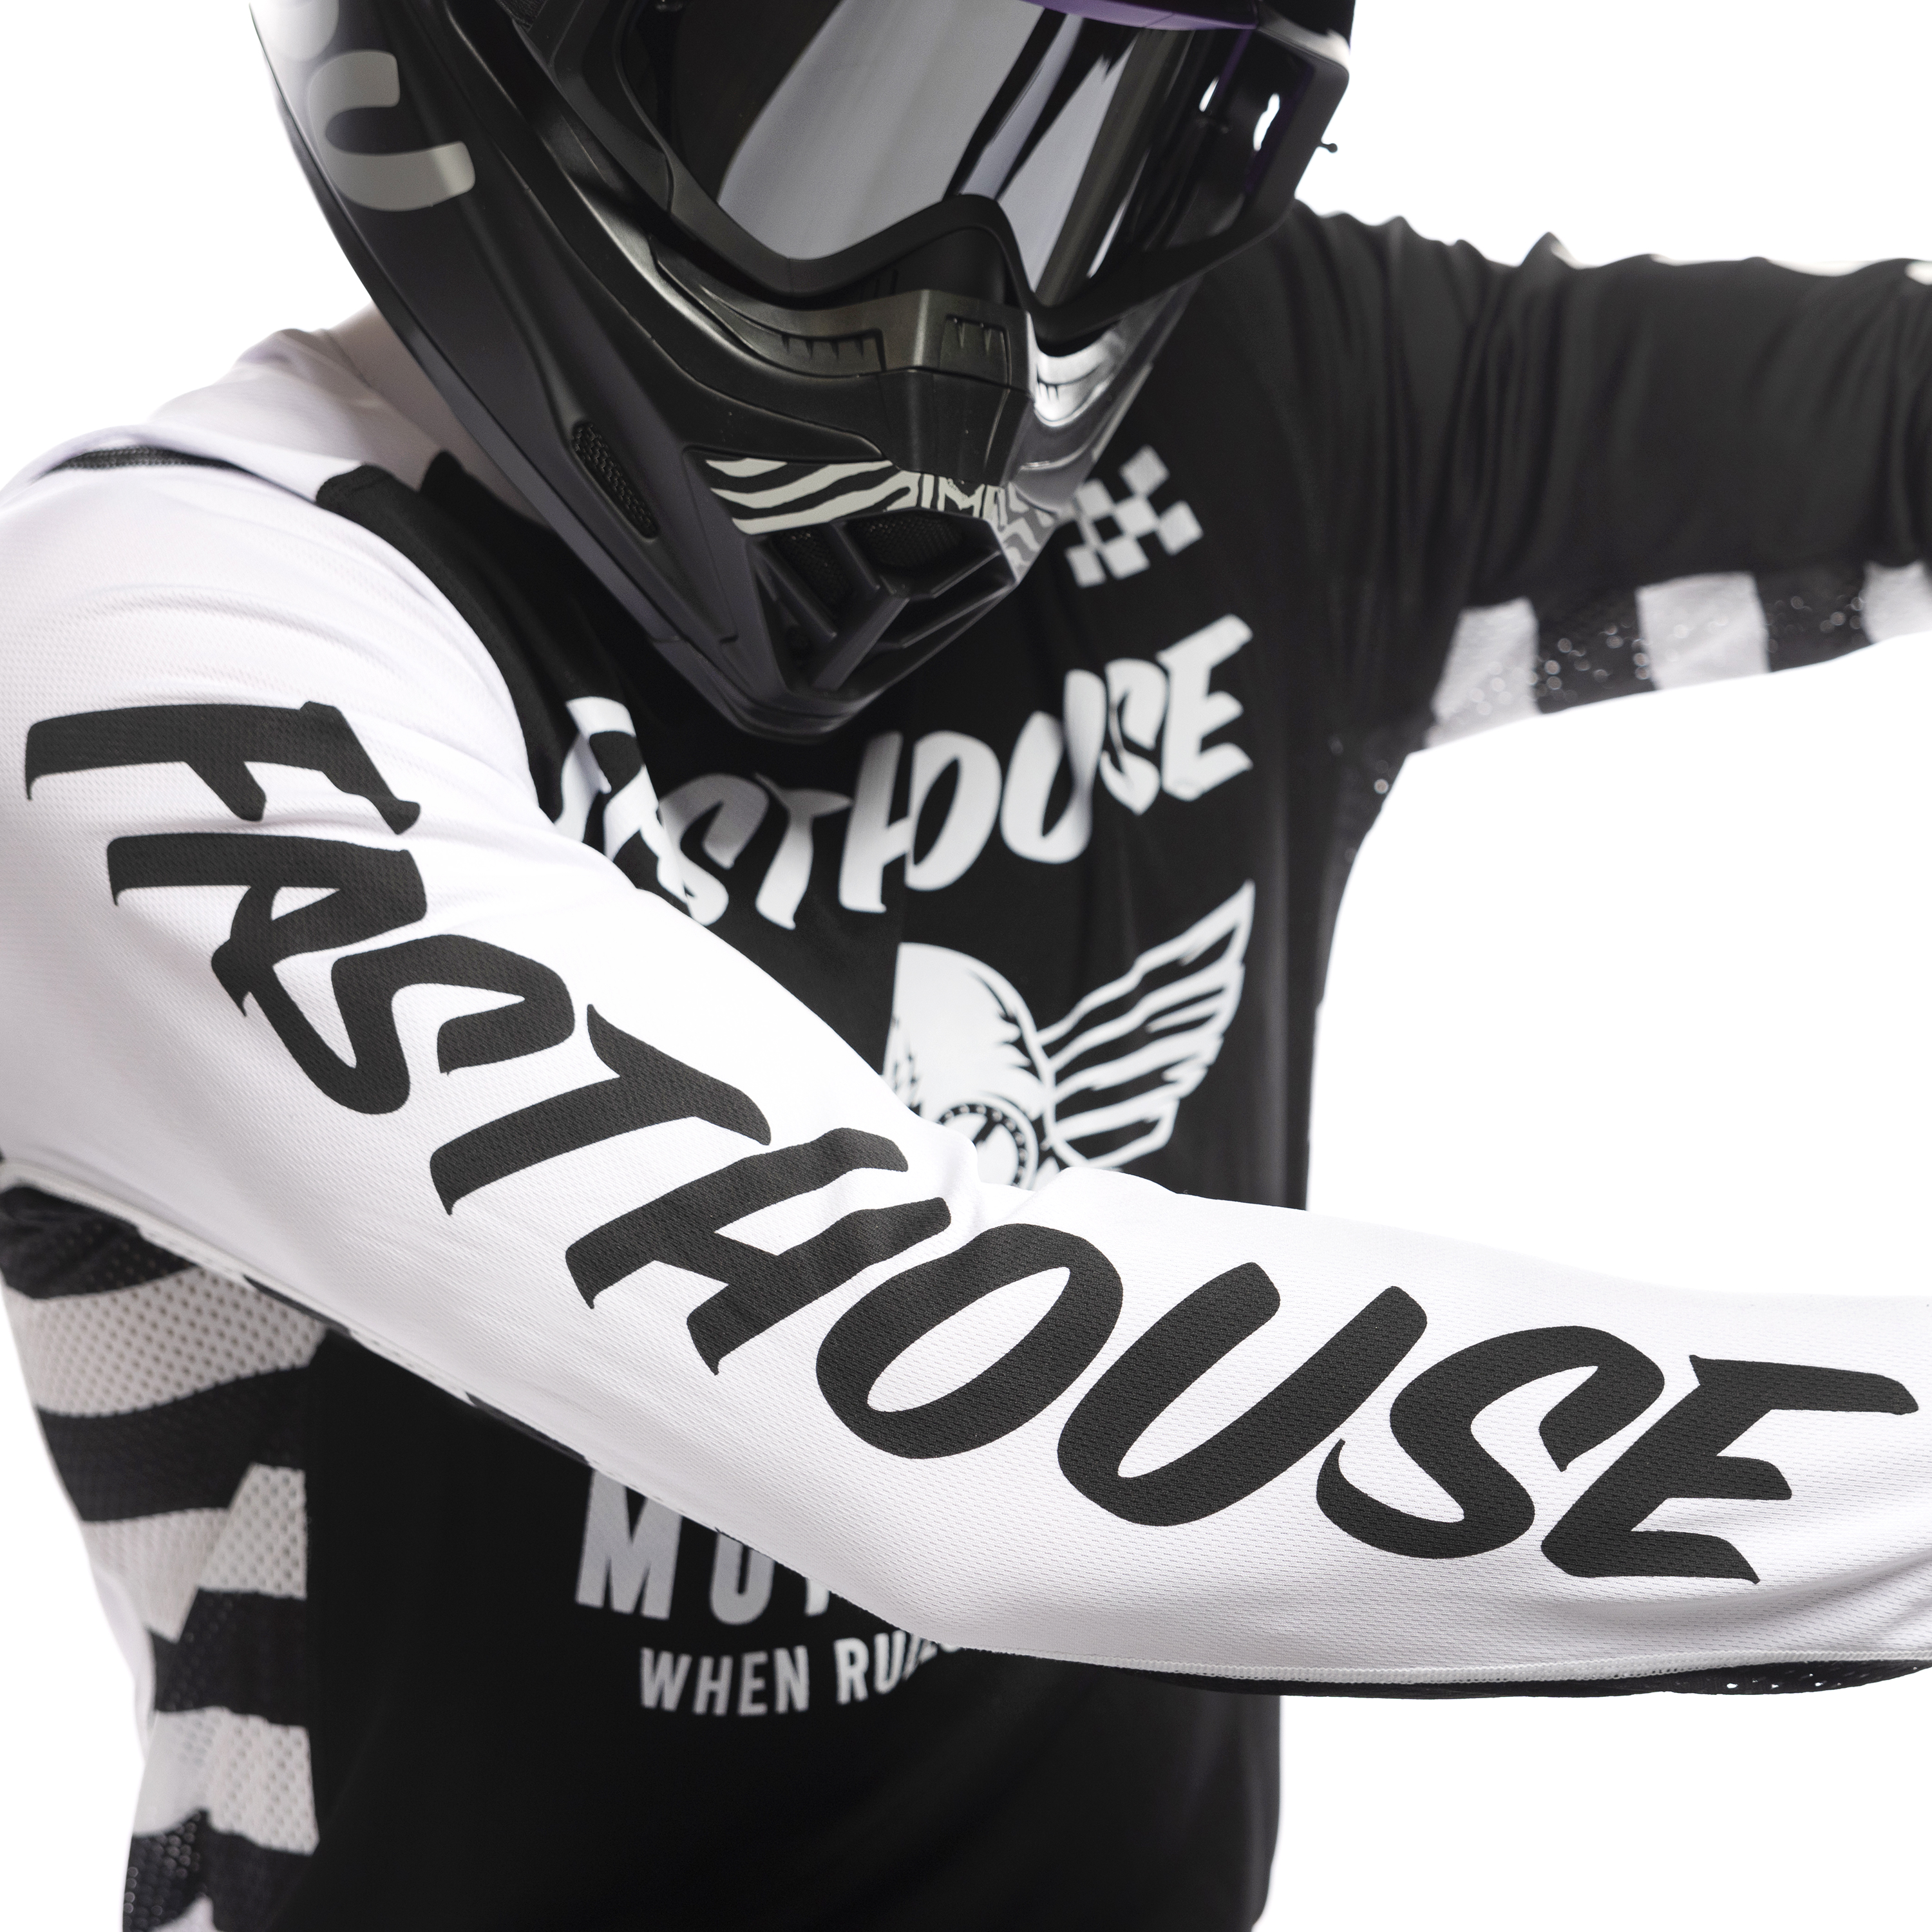 USA Grindhouse Factor Youth Jersey - Black_White_Detail4